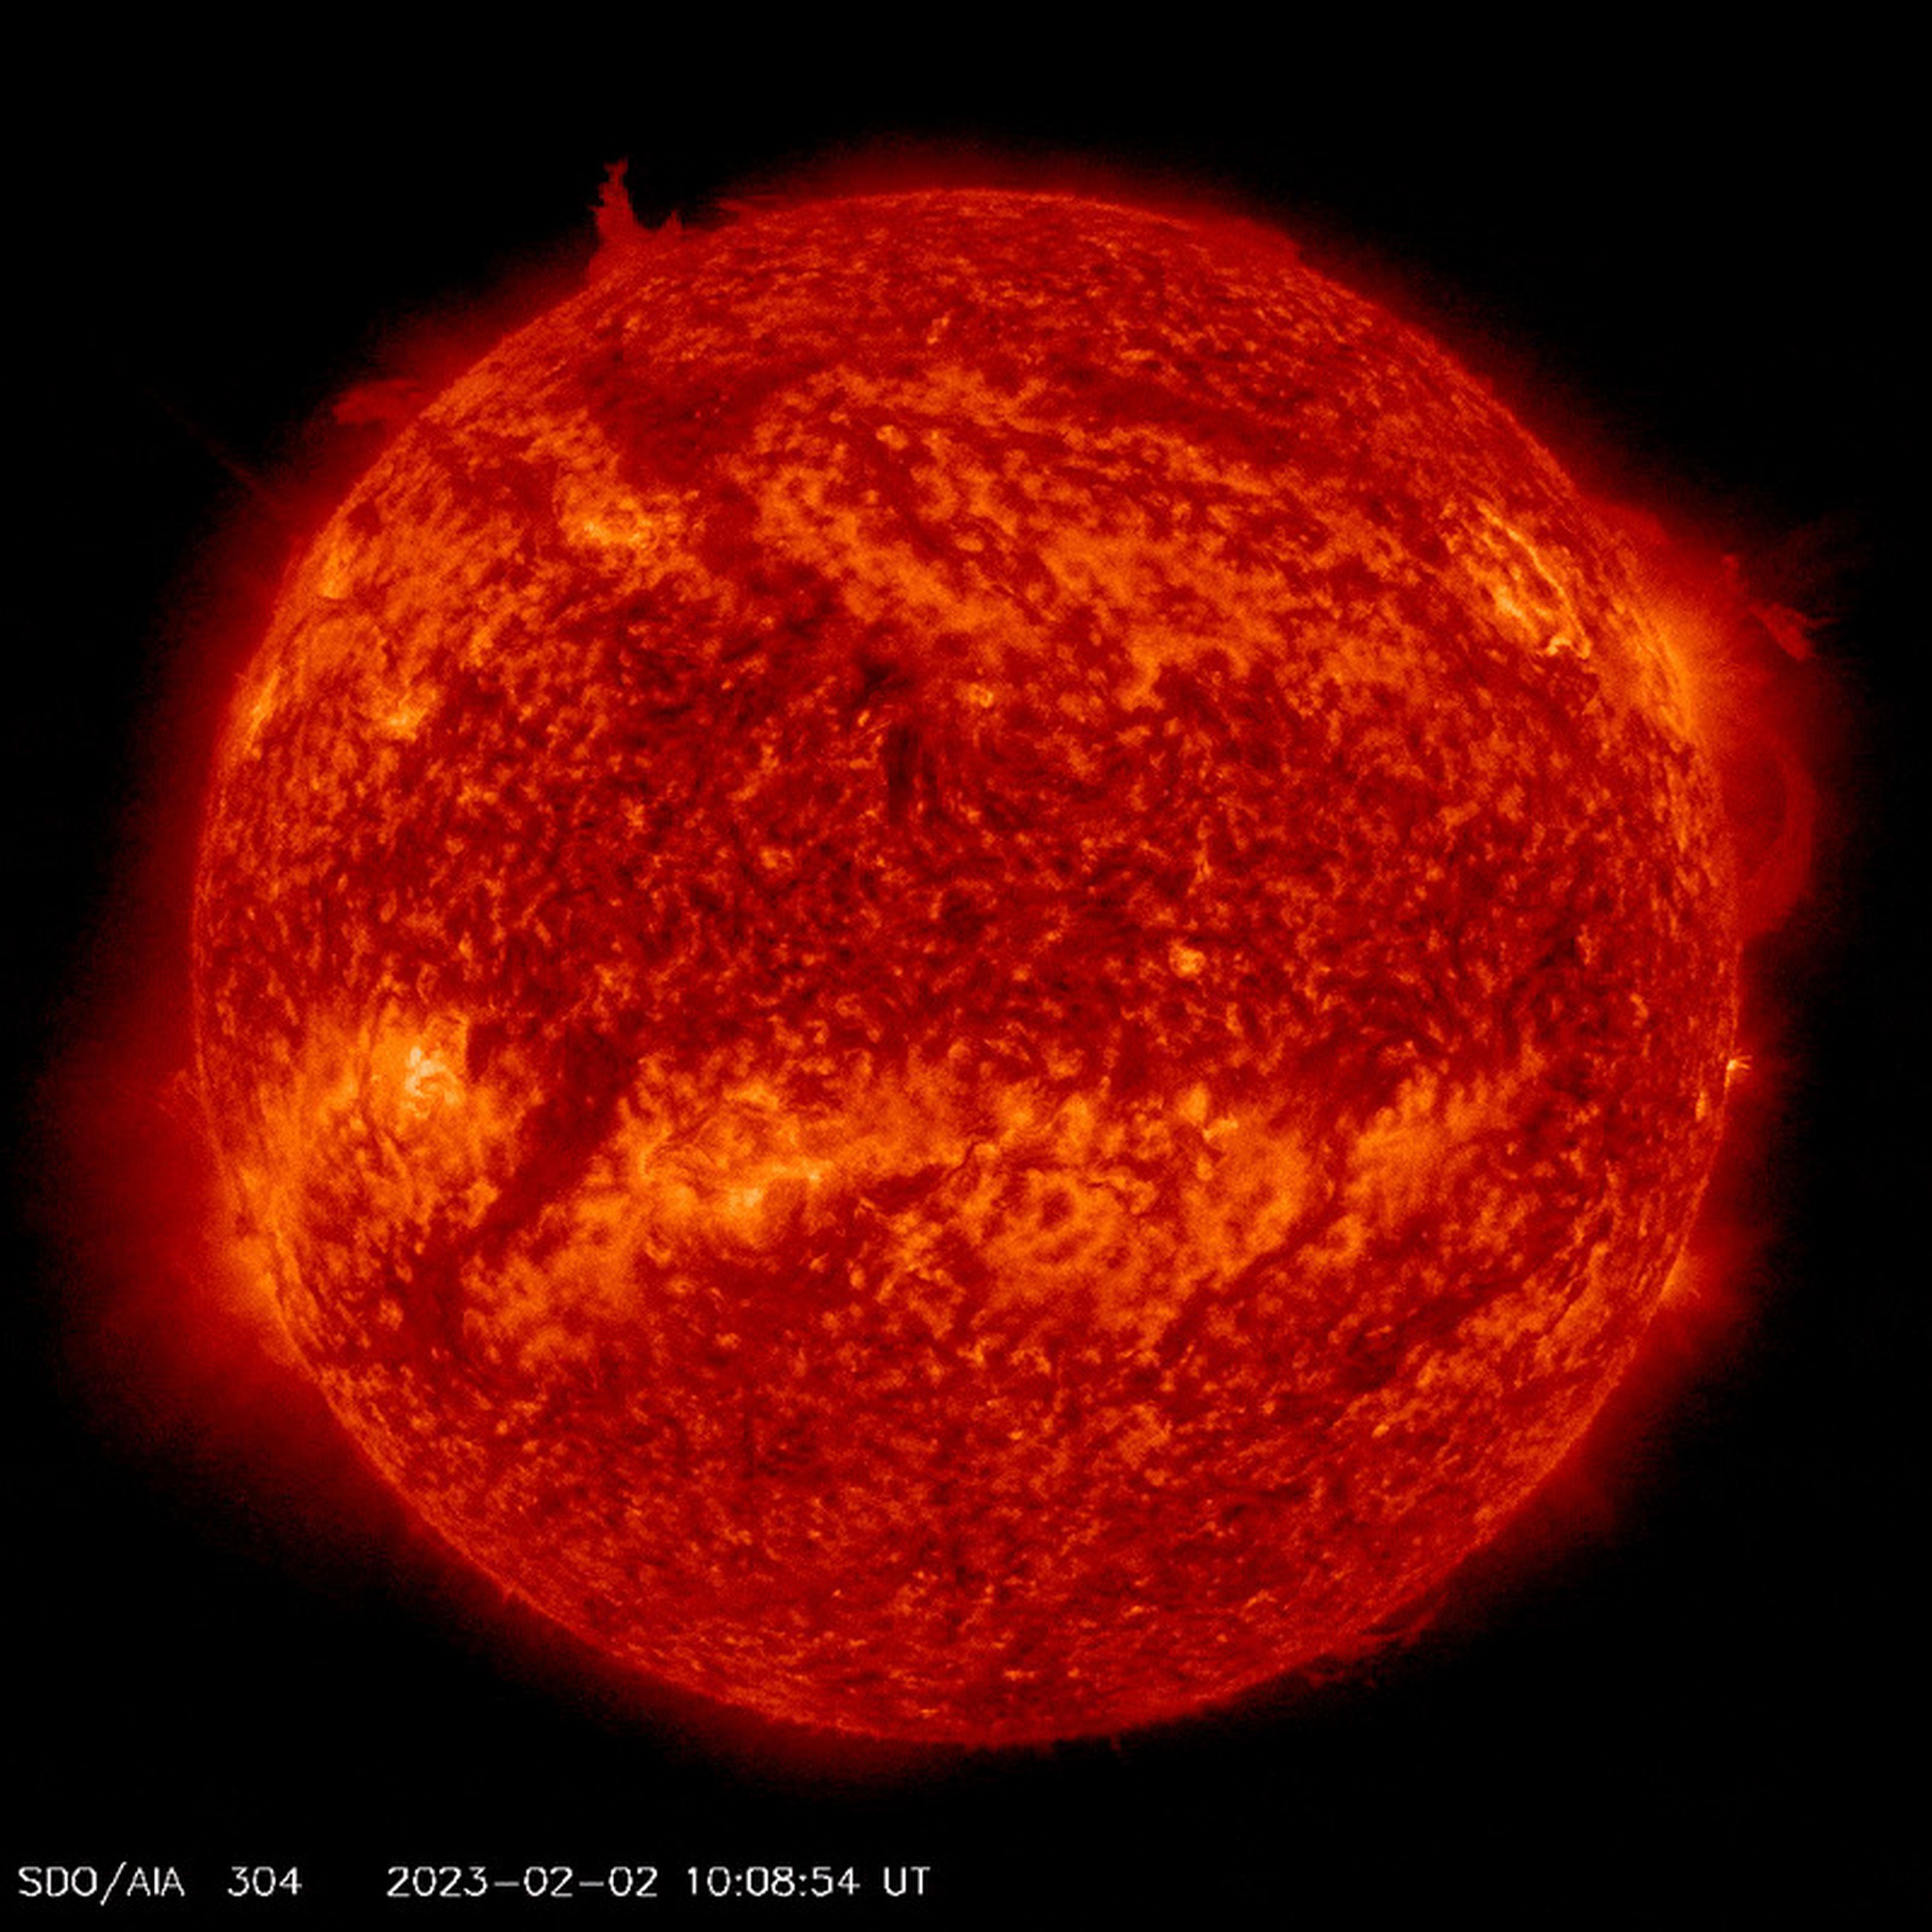 video shows sun rotating ball of red plasma with a filament emerging from the top then breaking away and swirling around the north pole